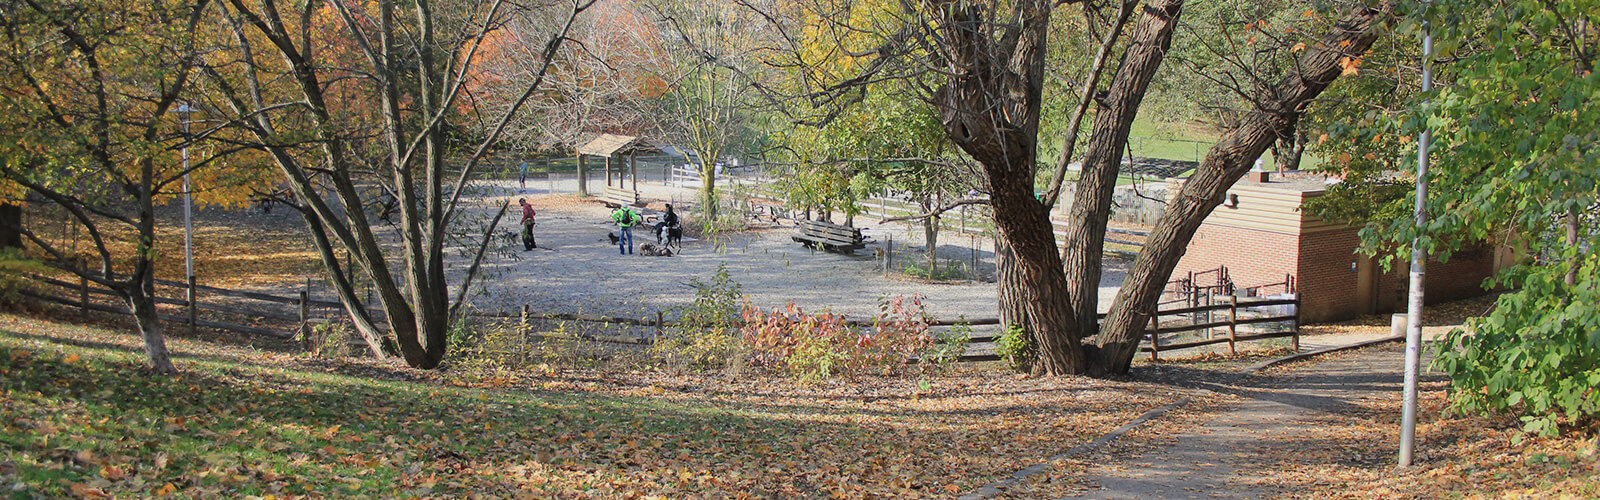 Taken from top of a hill, looking down at an off-leash dog park, enclosed with a wood fence where several people stand with their dogs. Fall leaves cover the ground. Some of the trees are bare, others still have green folliage and others in the background still have brightly coloured leaves. A paved path descends down the hill from the foreground.